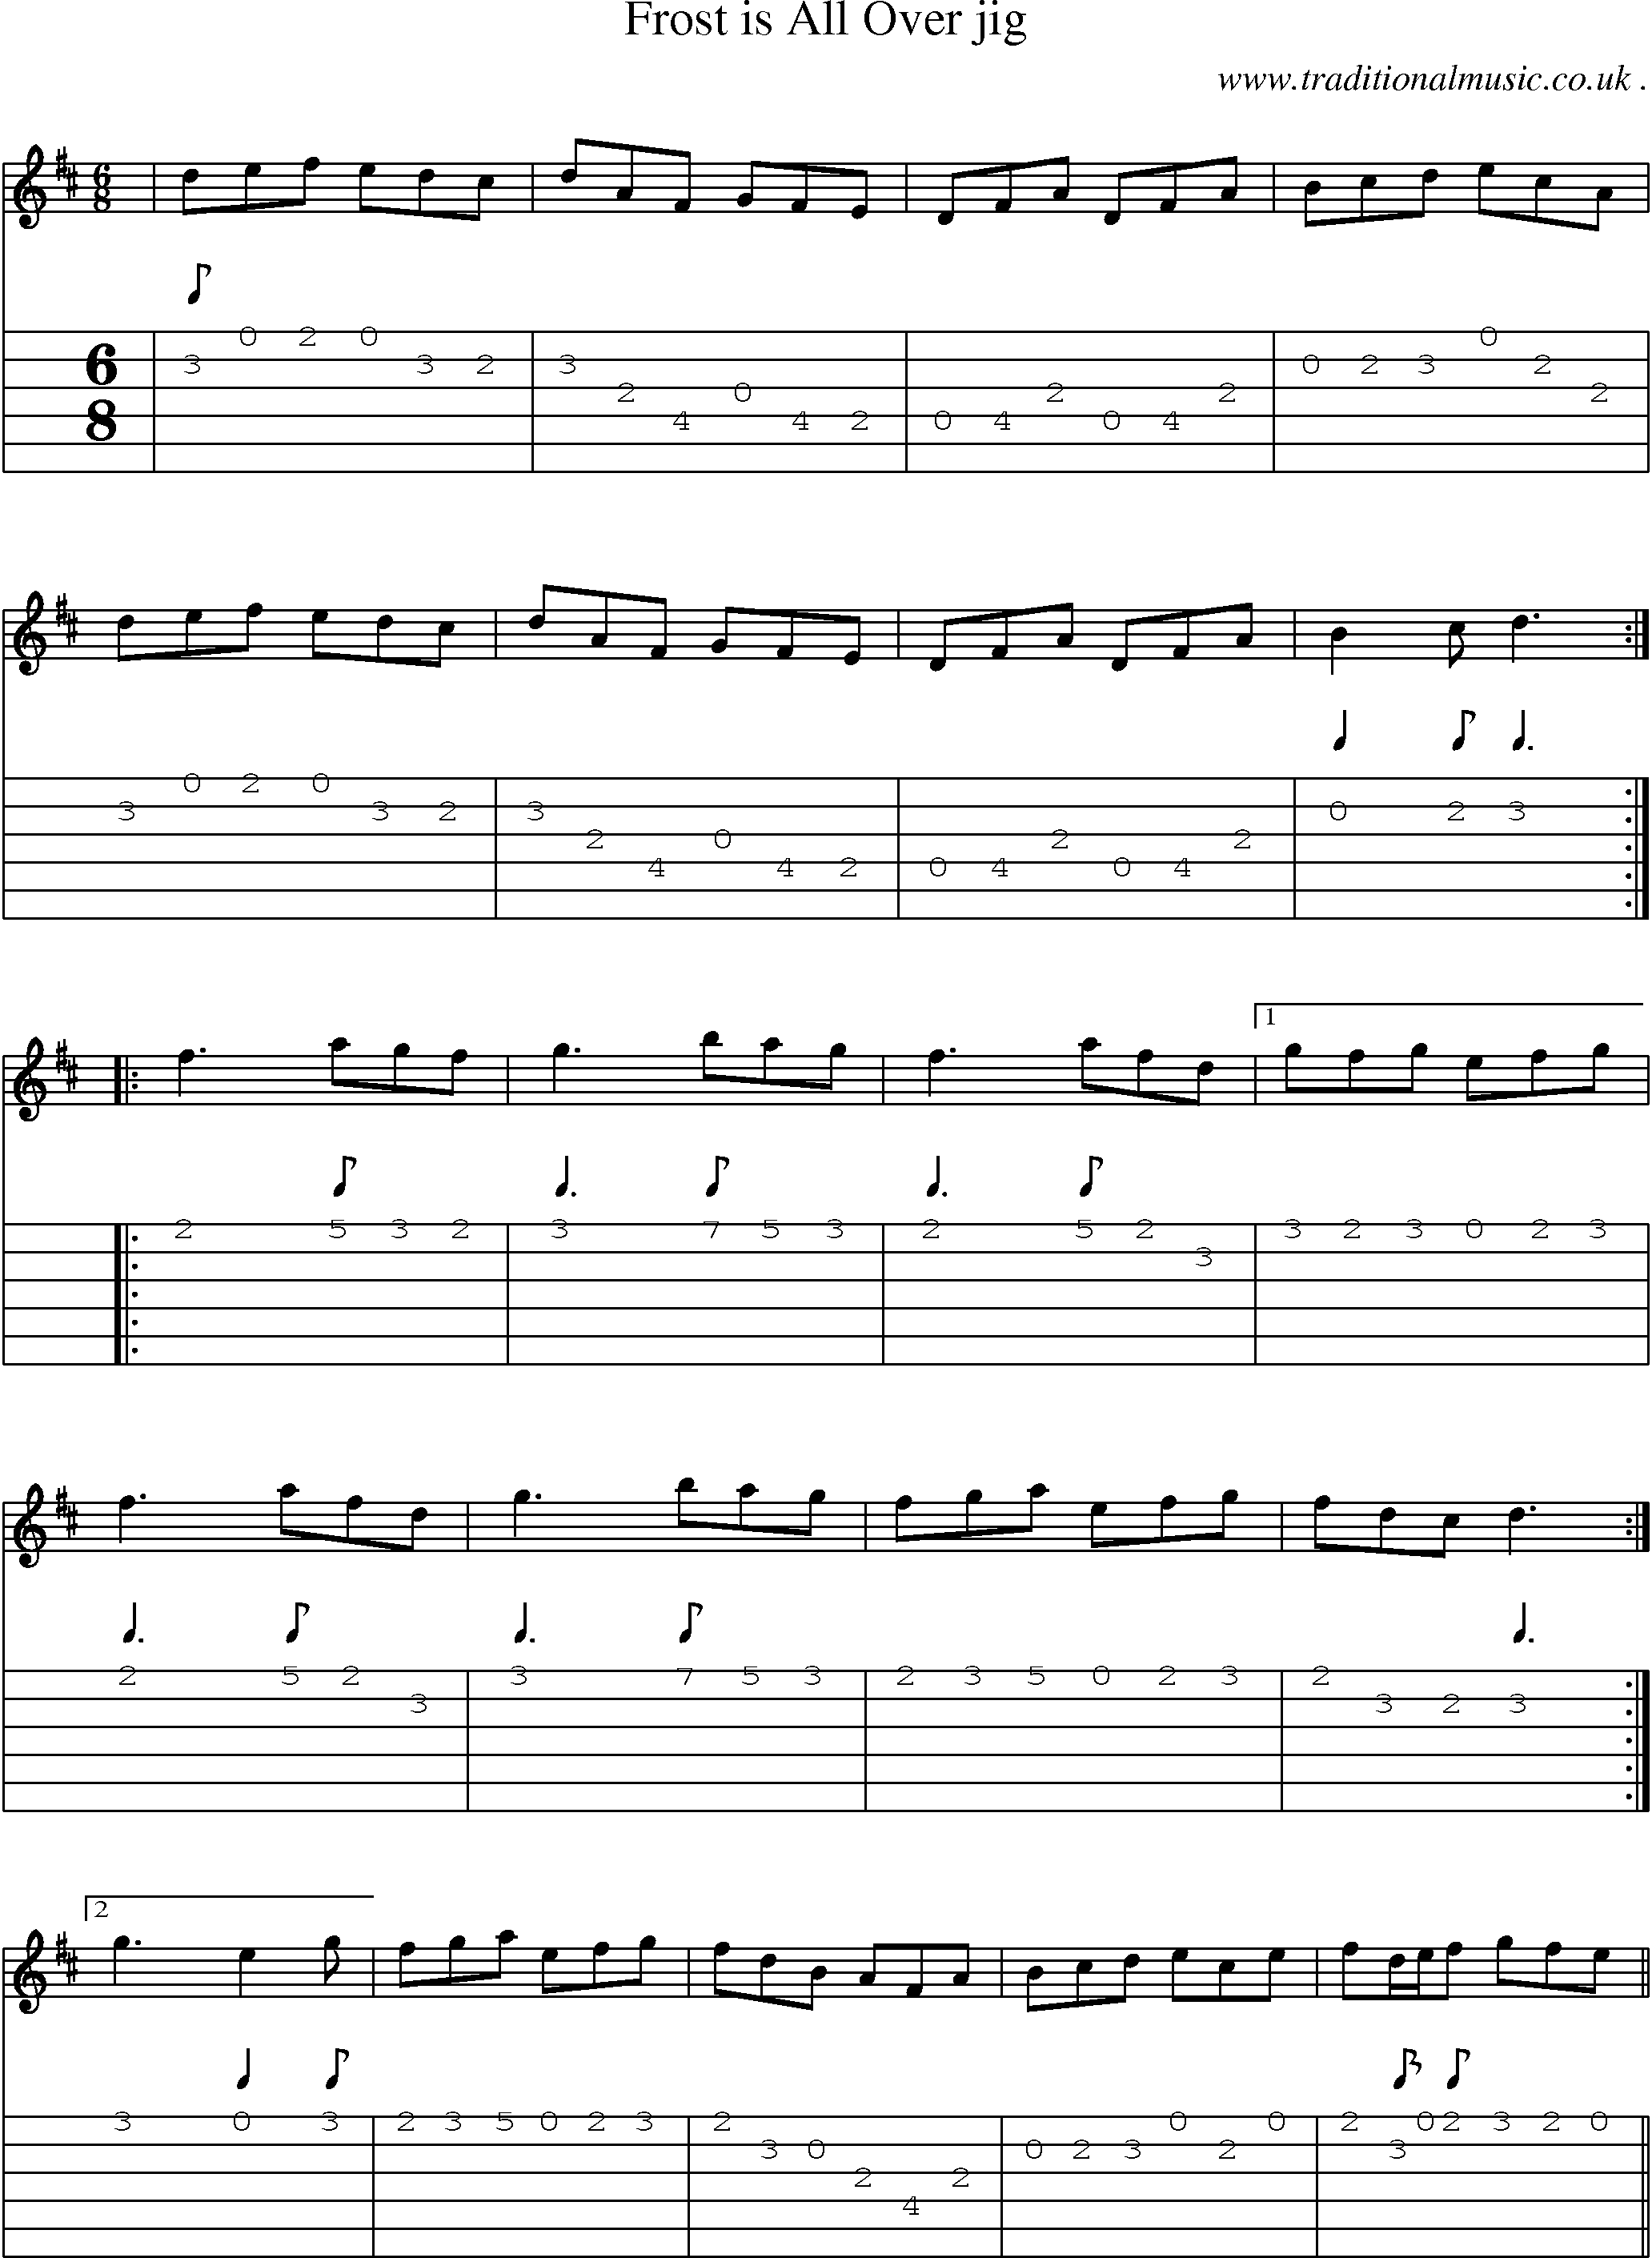 Sheet-Music and Guitar Tabs for Frost Is All Over Jig